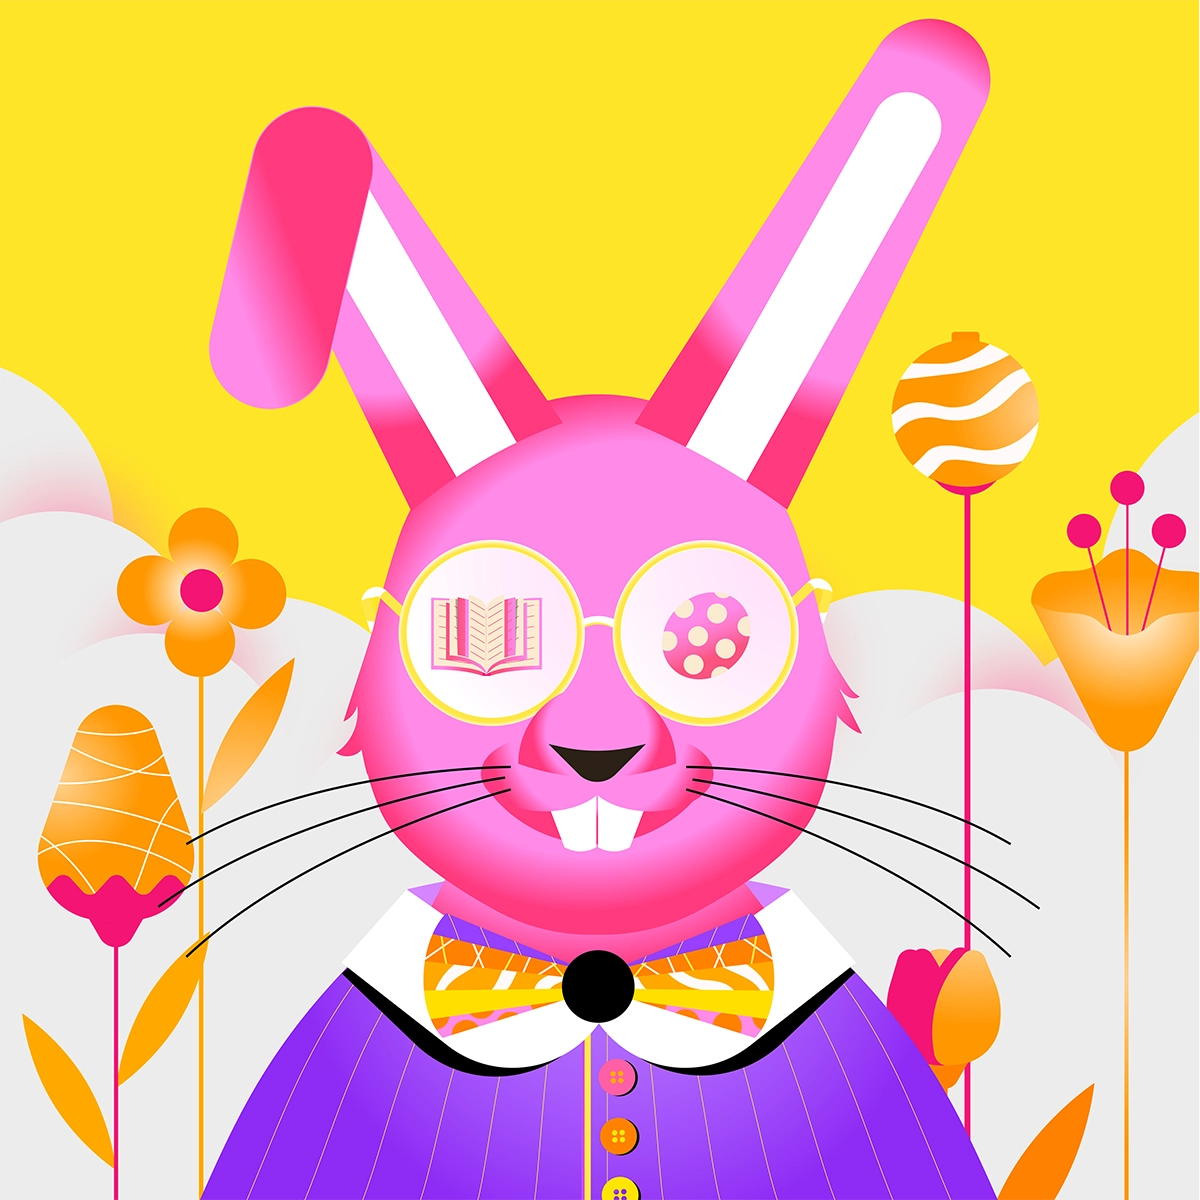 Illustration of Easter bunny wearing sunglasses and a bowtie, and surrounded by flowers